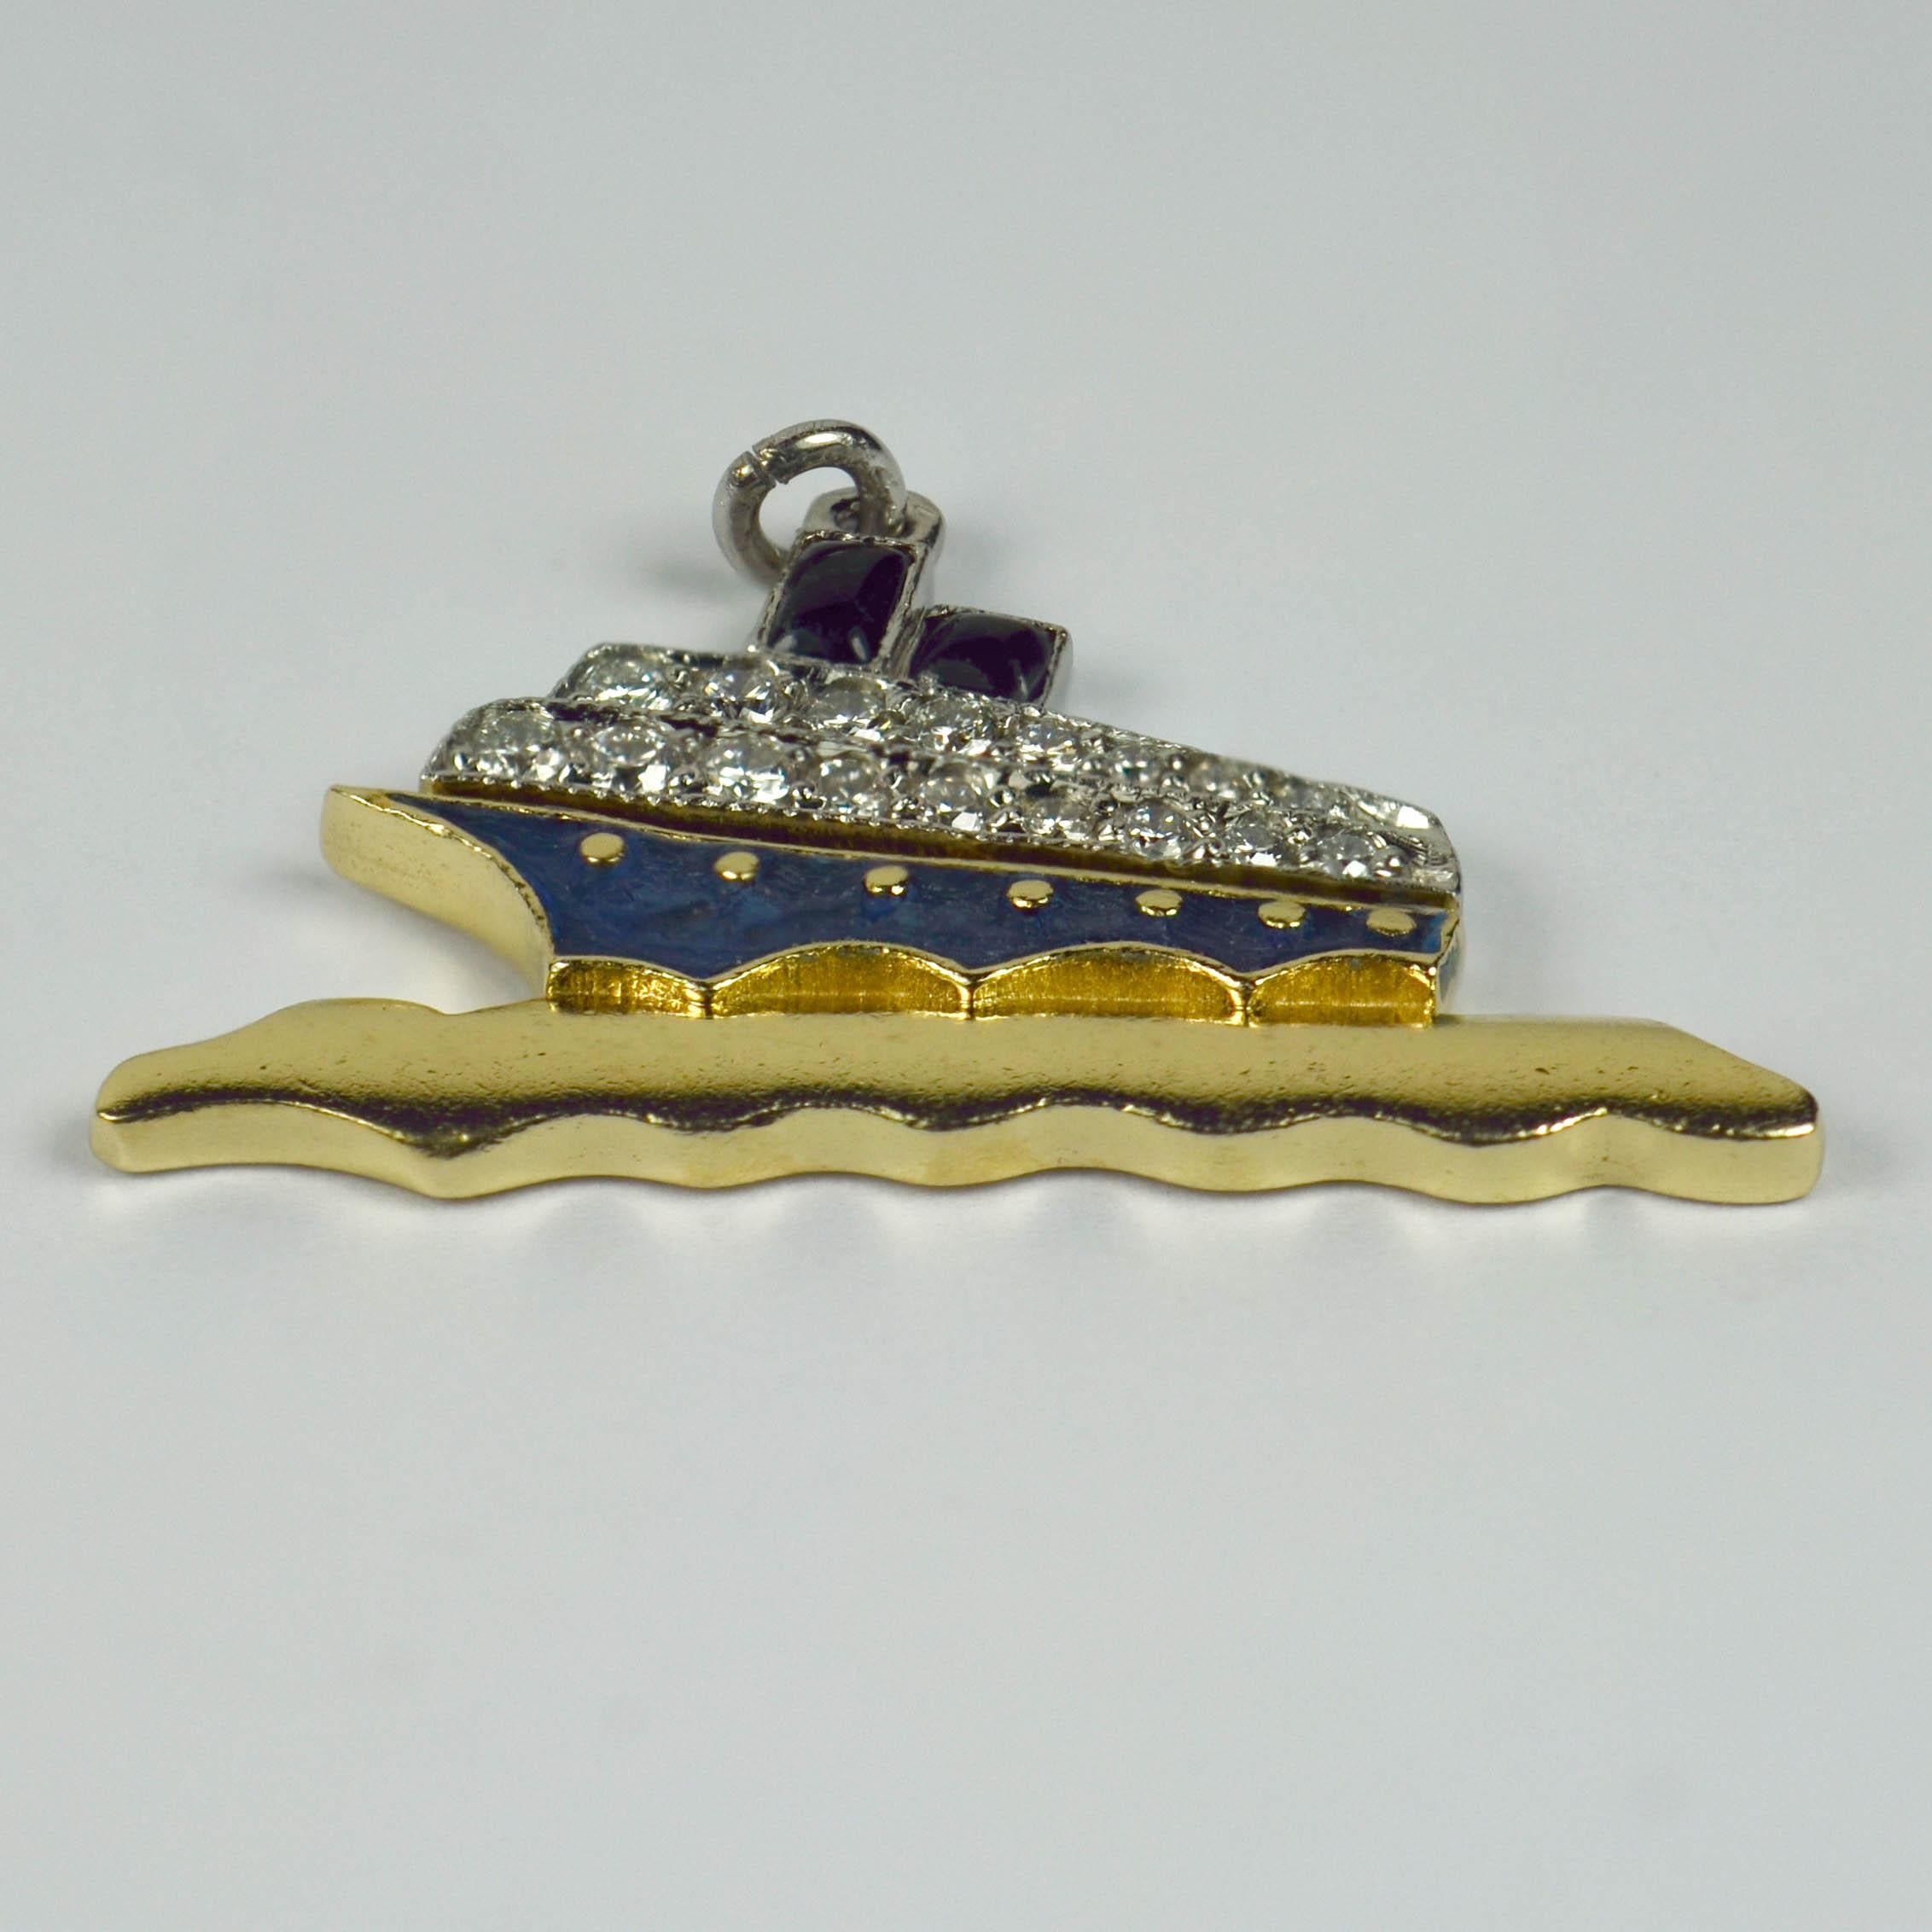 An Art Deco platinum and yellow gold charm pendant designed as an ocean liner with blue and black enamel set with 17 round brilliant cut white diamonds with a total estimated weight of 0.51 carats. Unmarked but tested as platinum and 18 karat